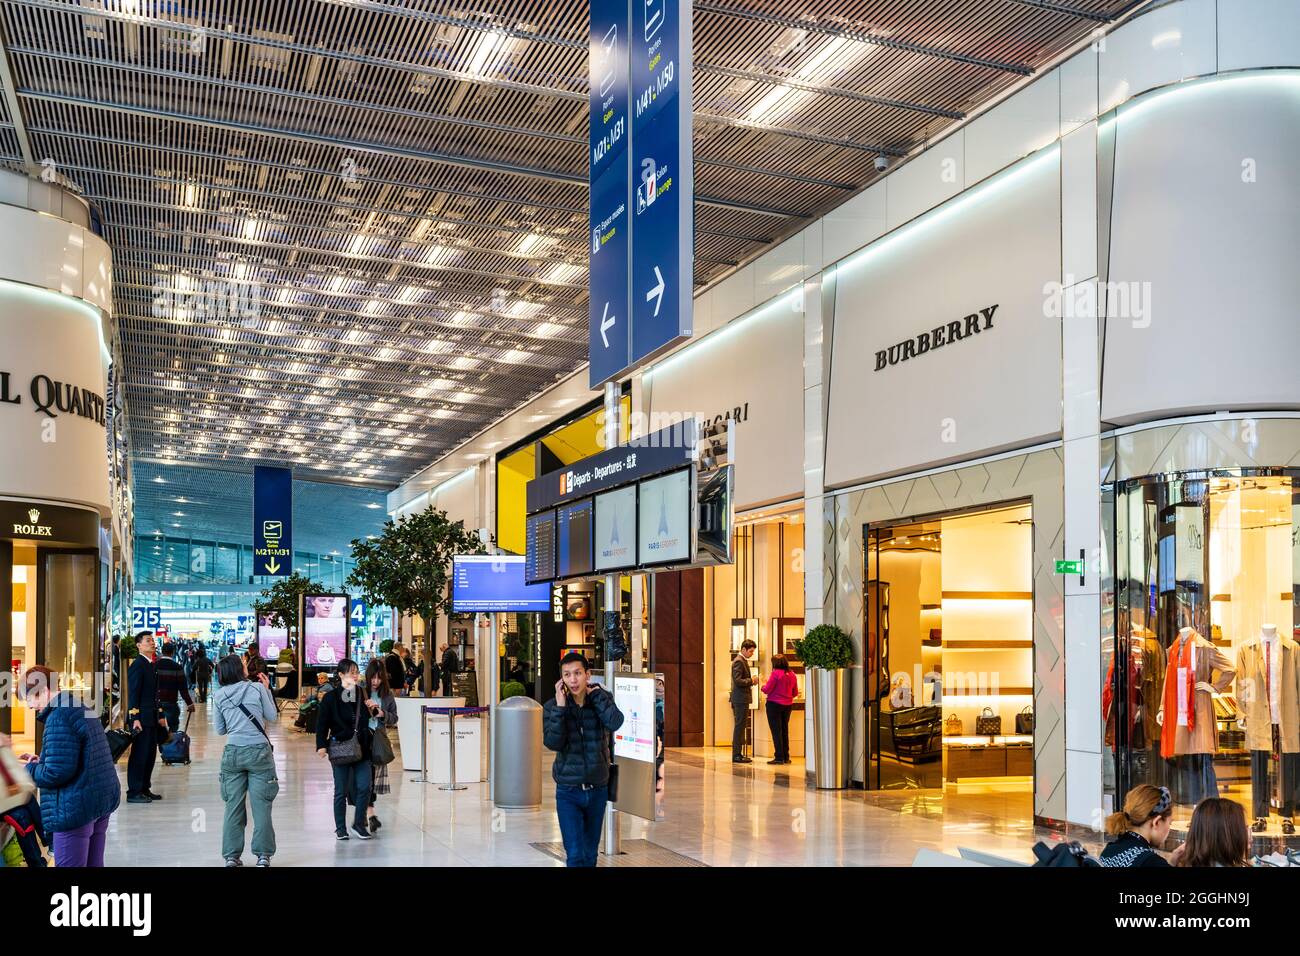 Charles De Gaulle Airport. Interior of Terminal 2E departure lounge. People  walking by fashionable stores with the Burberry store in the foreground  Stock Photo - Alamy